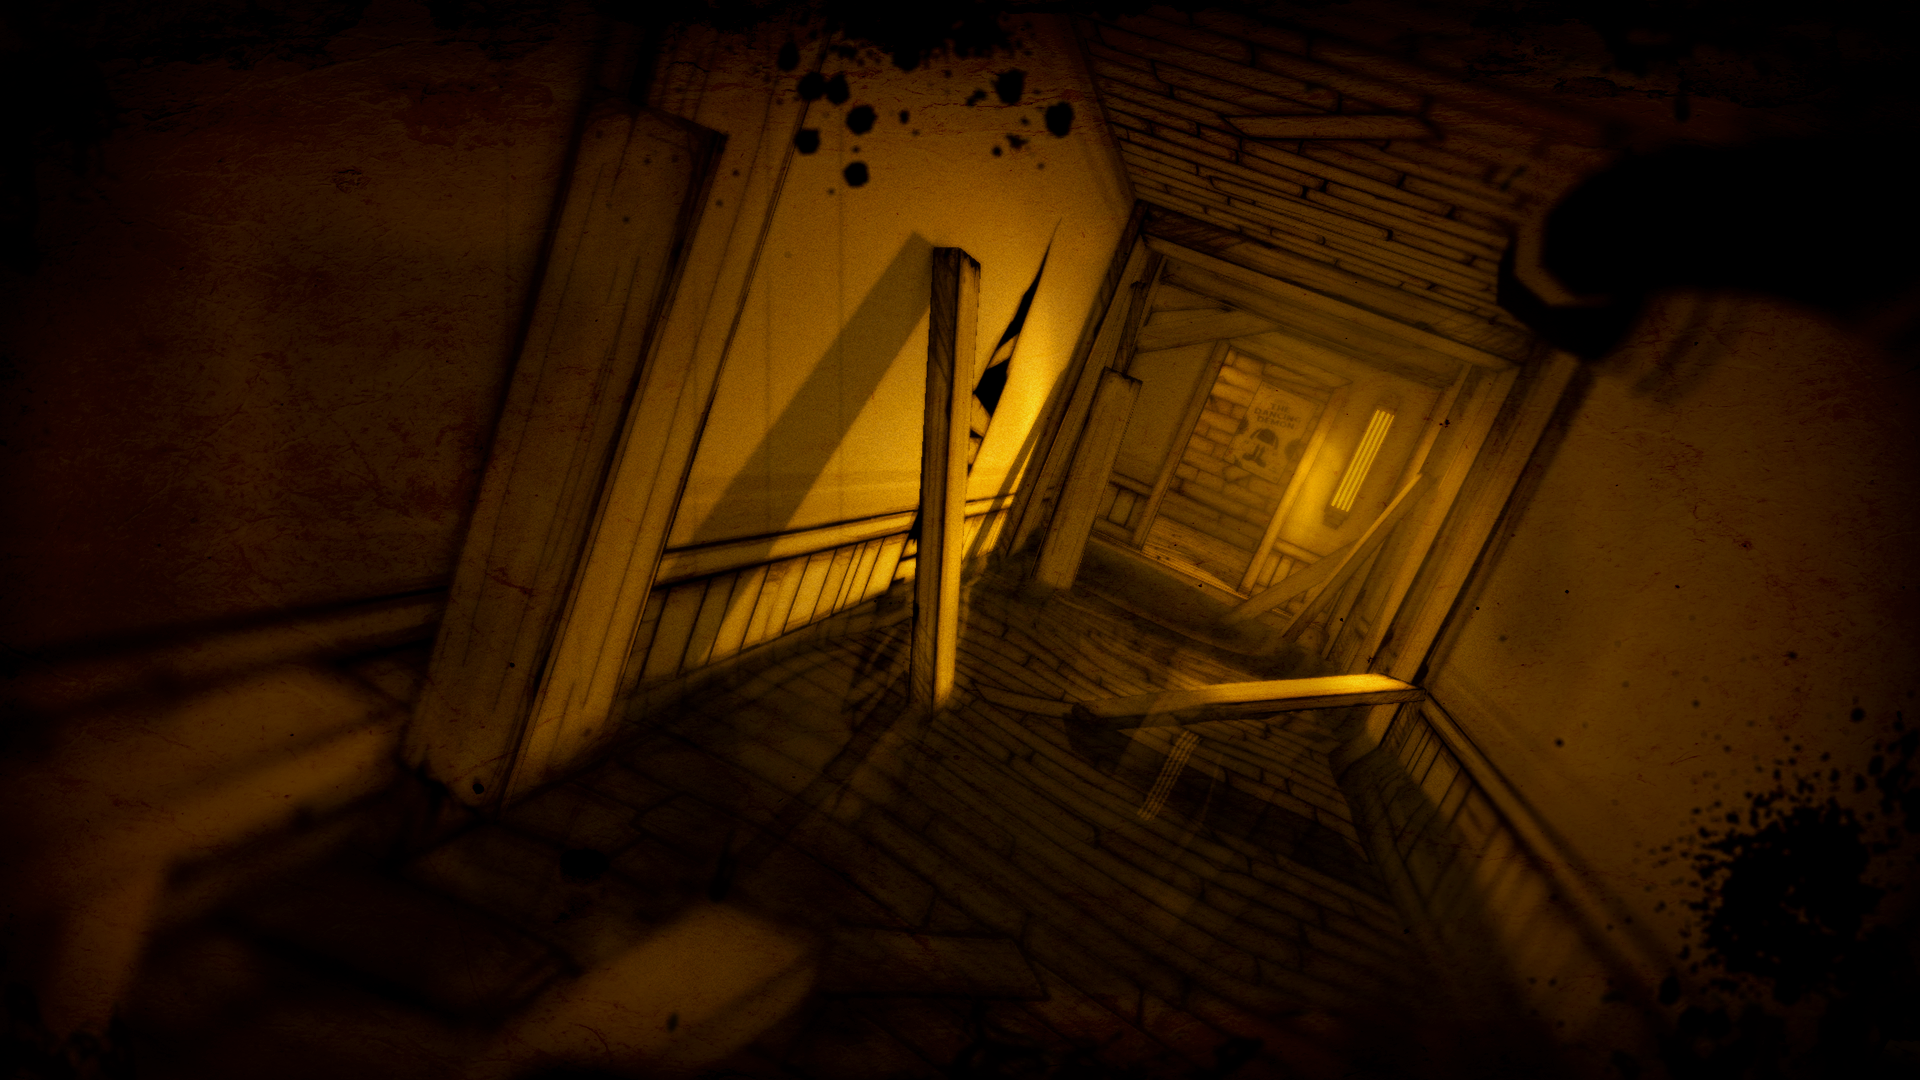 bendy and the ink machine chapter 2 easter eggs